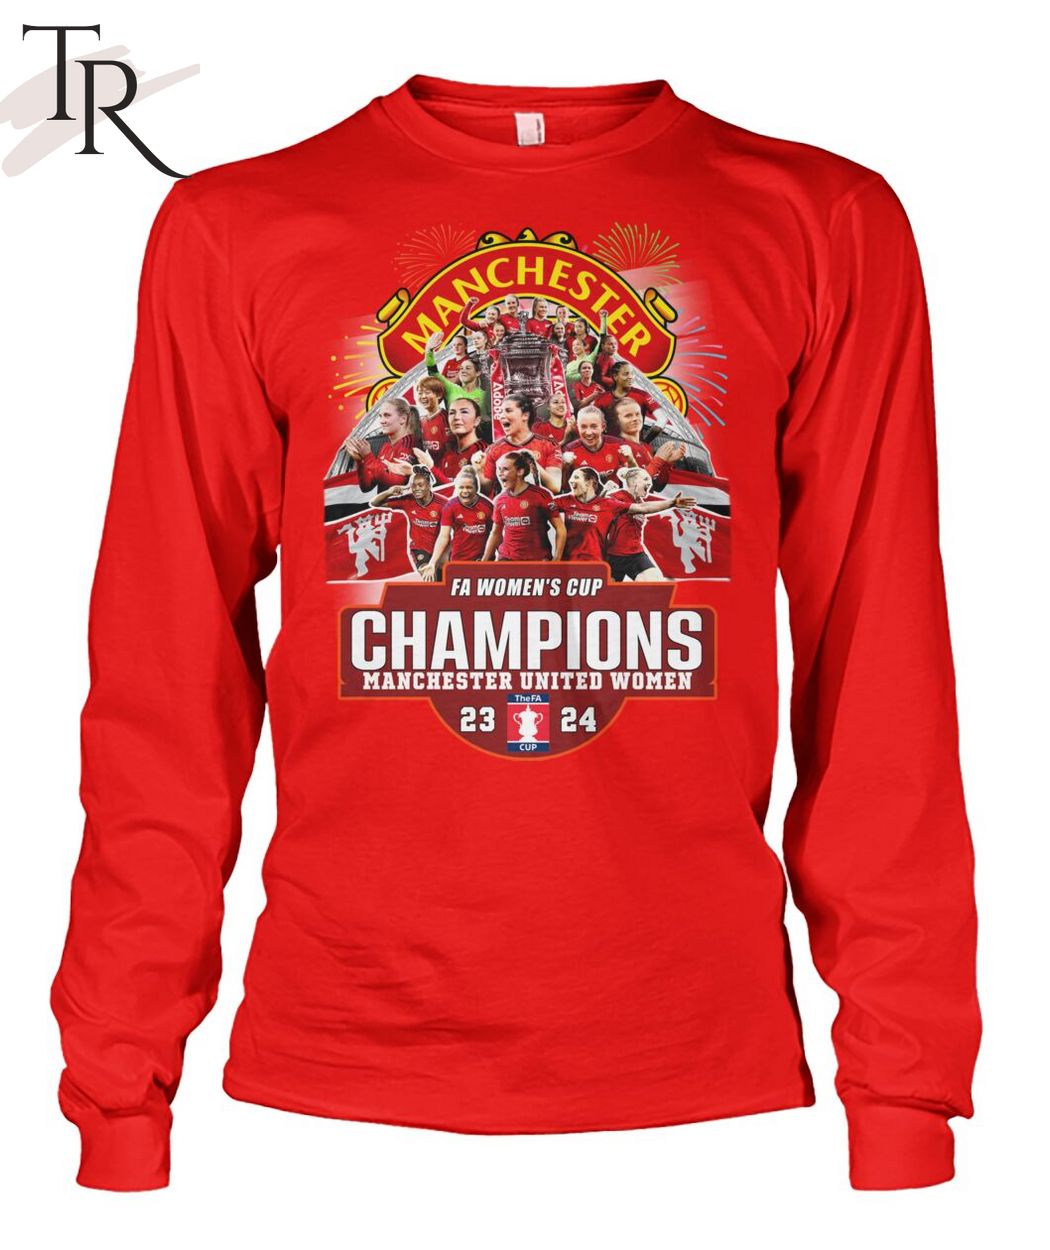 FA Women's Cup Champions Manchester United Women 23-24 T-Shirt